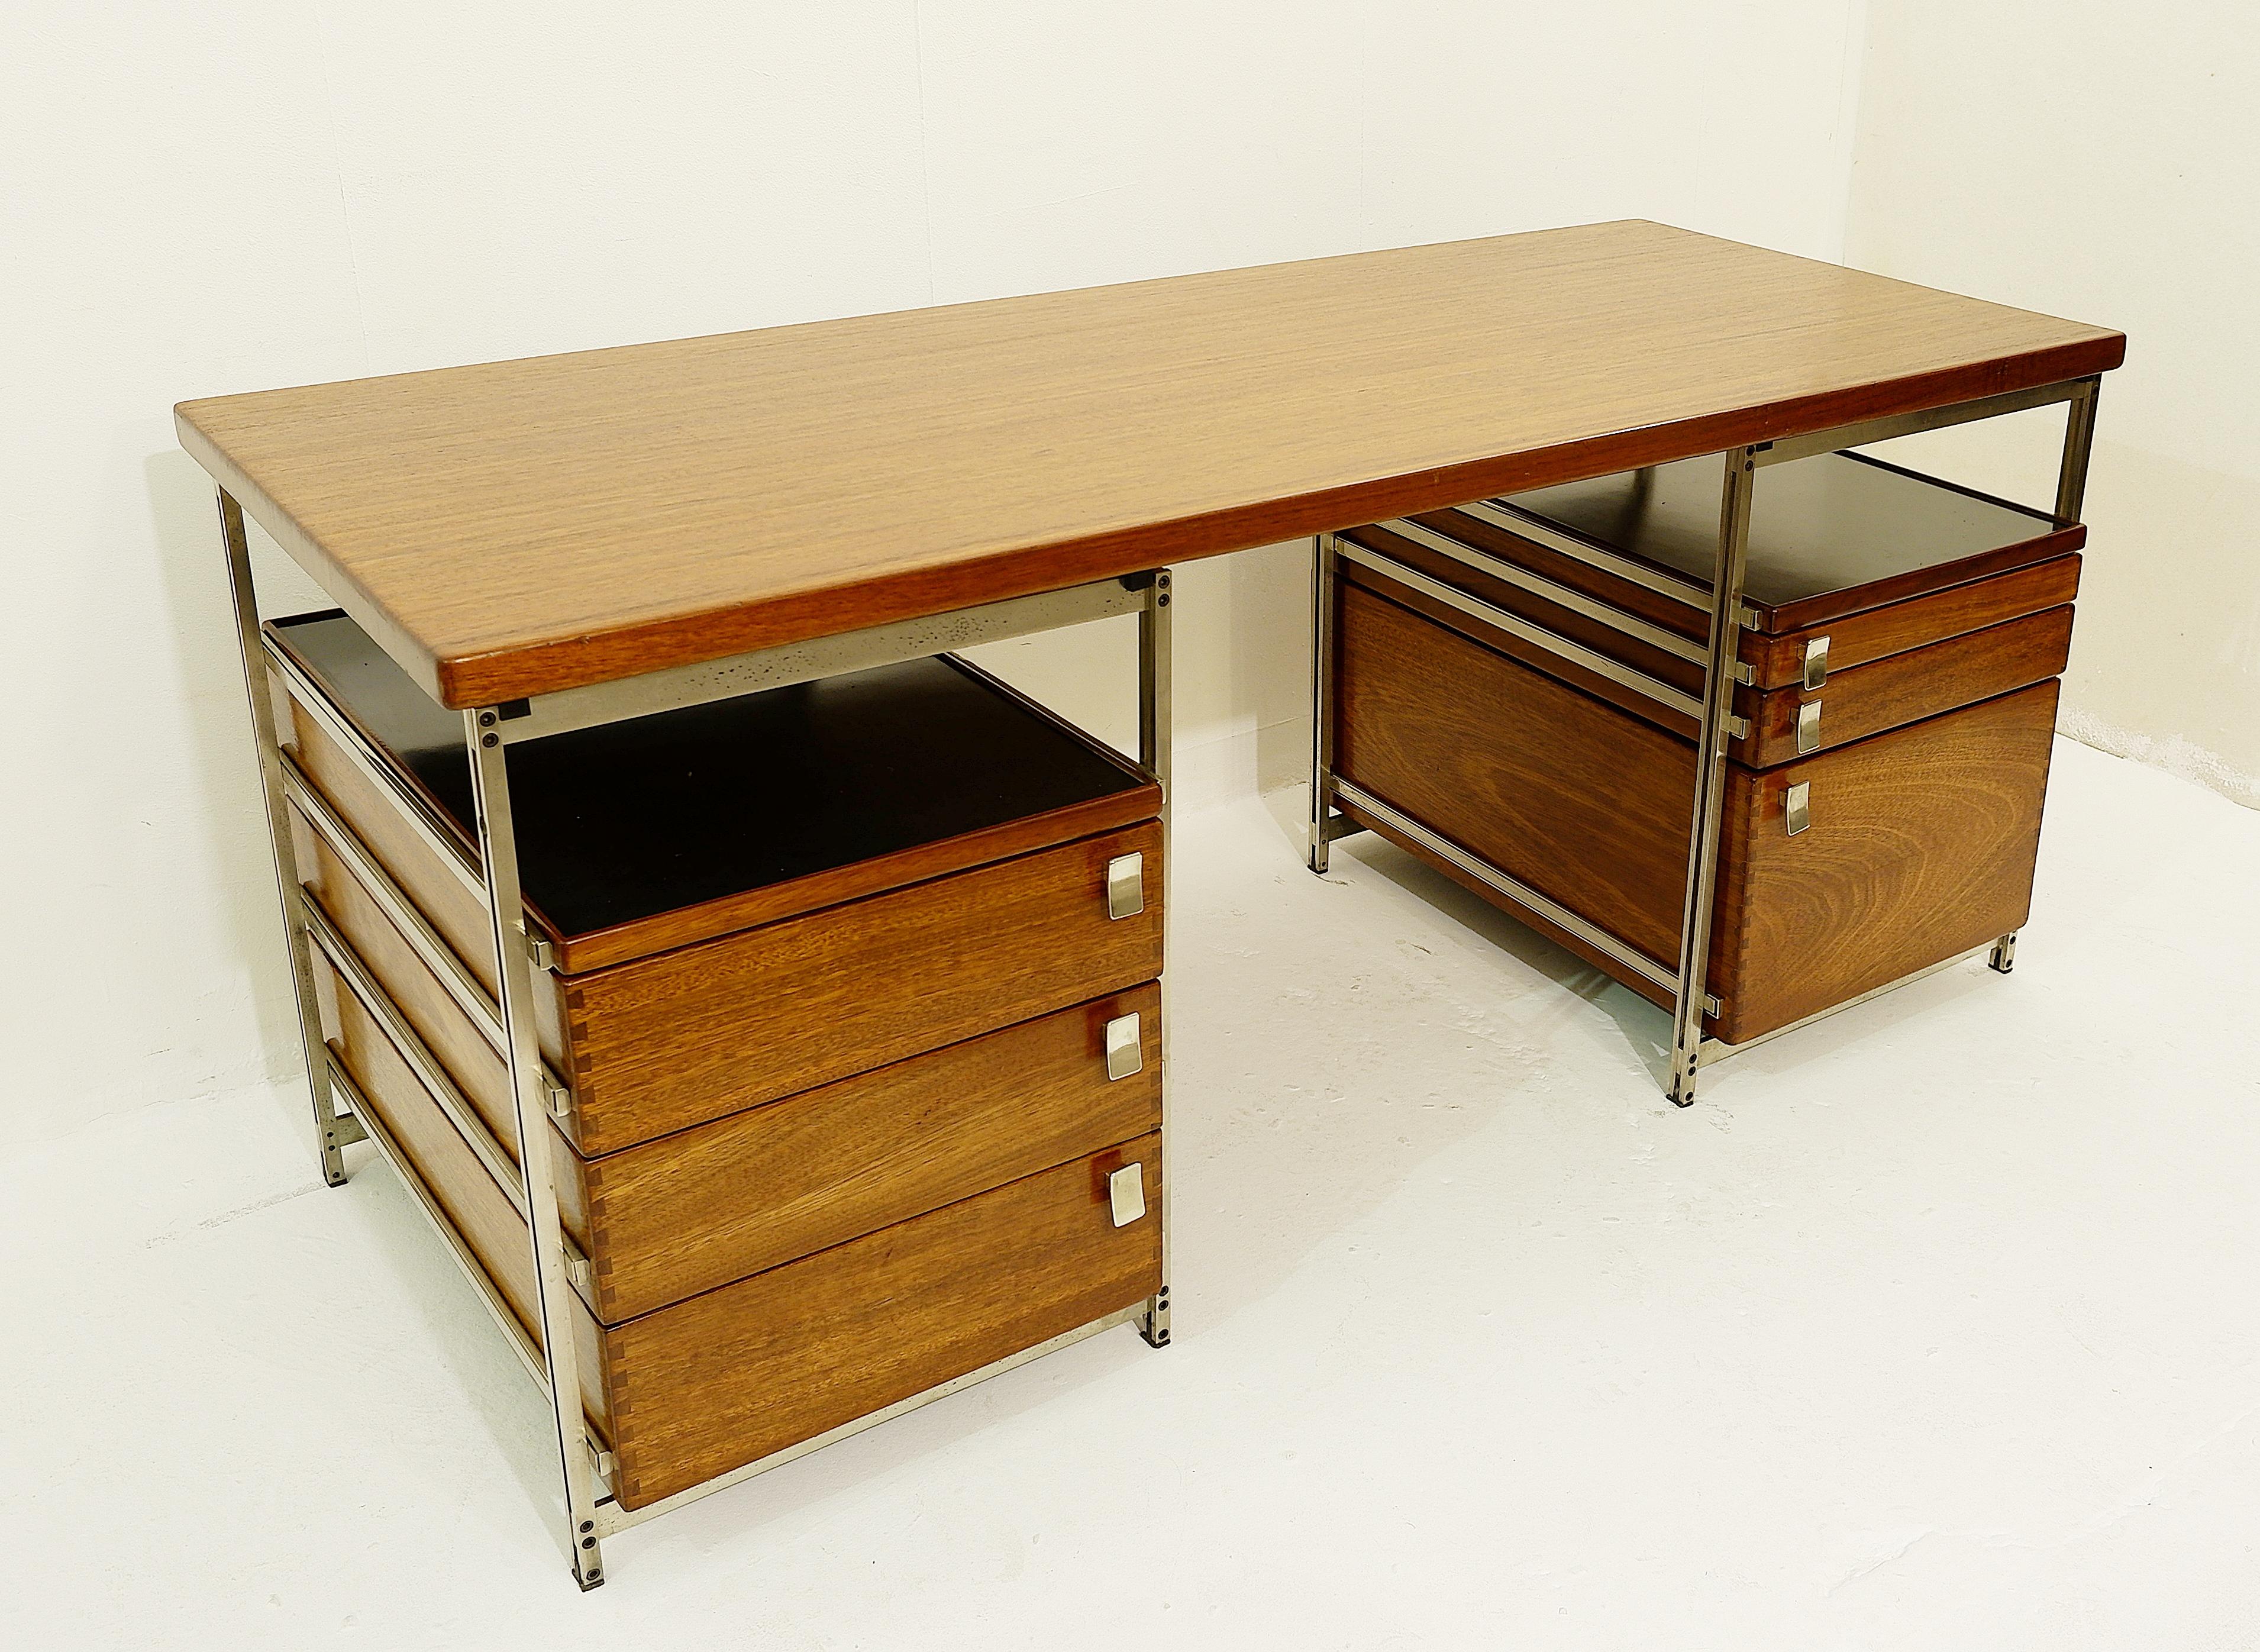 Desk by Jules Wabbes for Foncolin, Belgium, 1957.